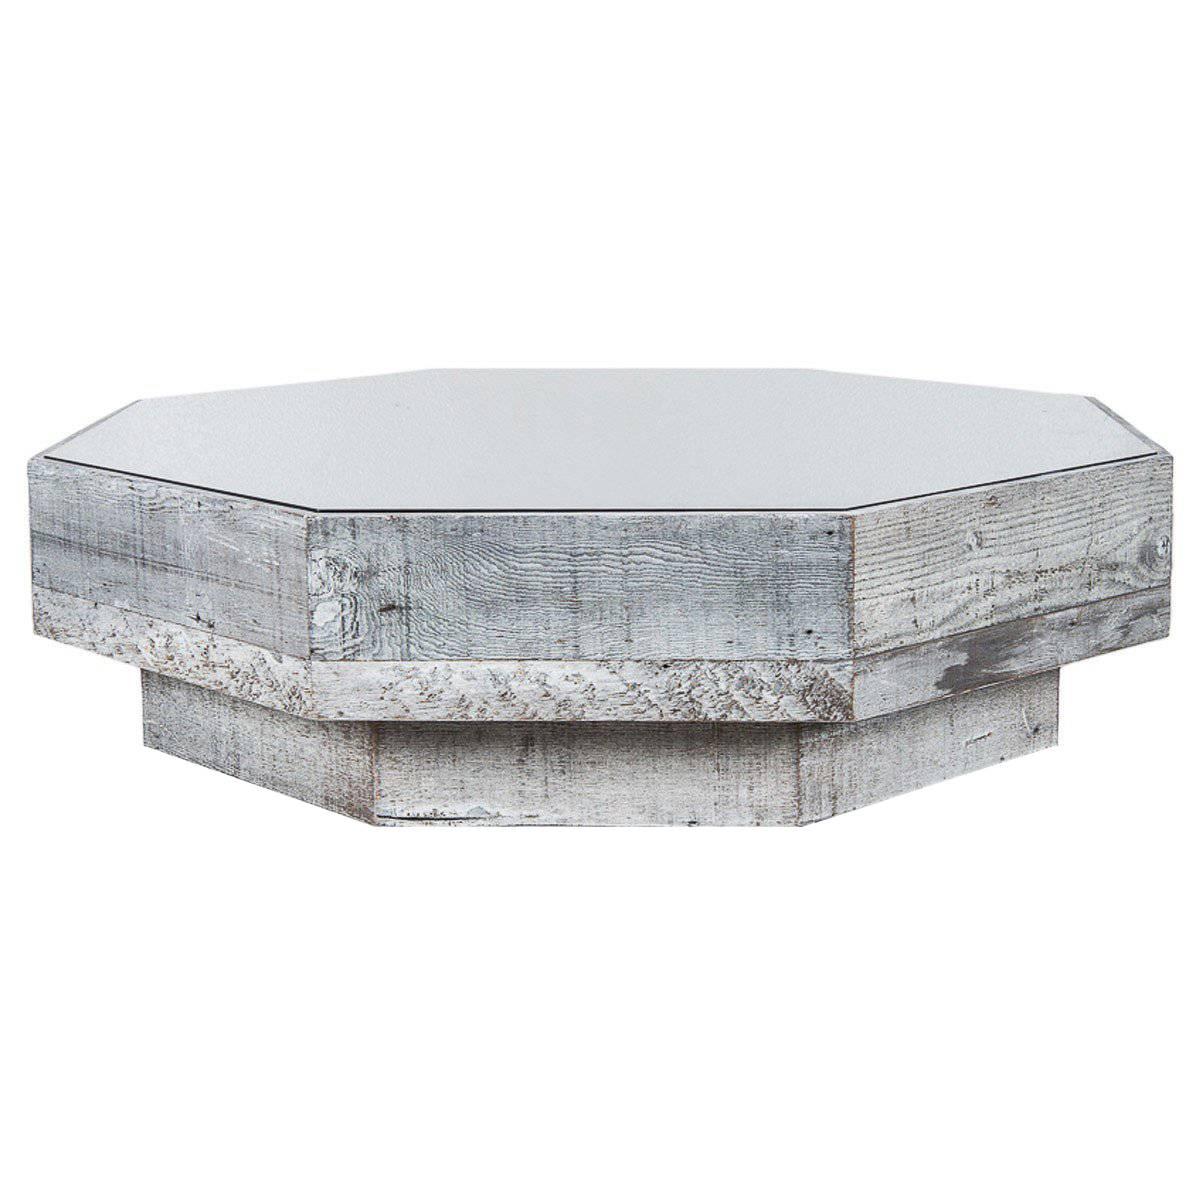 Rustic Modern Octagon Coffee Table in Recycled Bar Wood with Beveled Glass Top